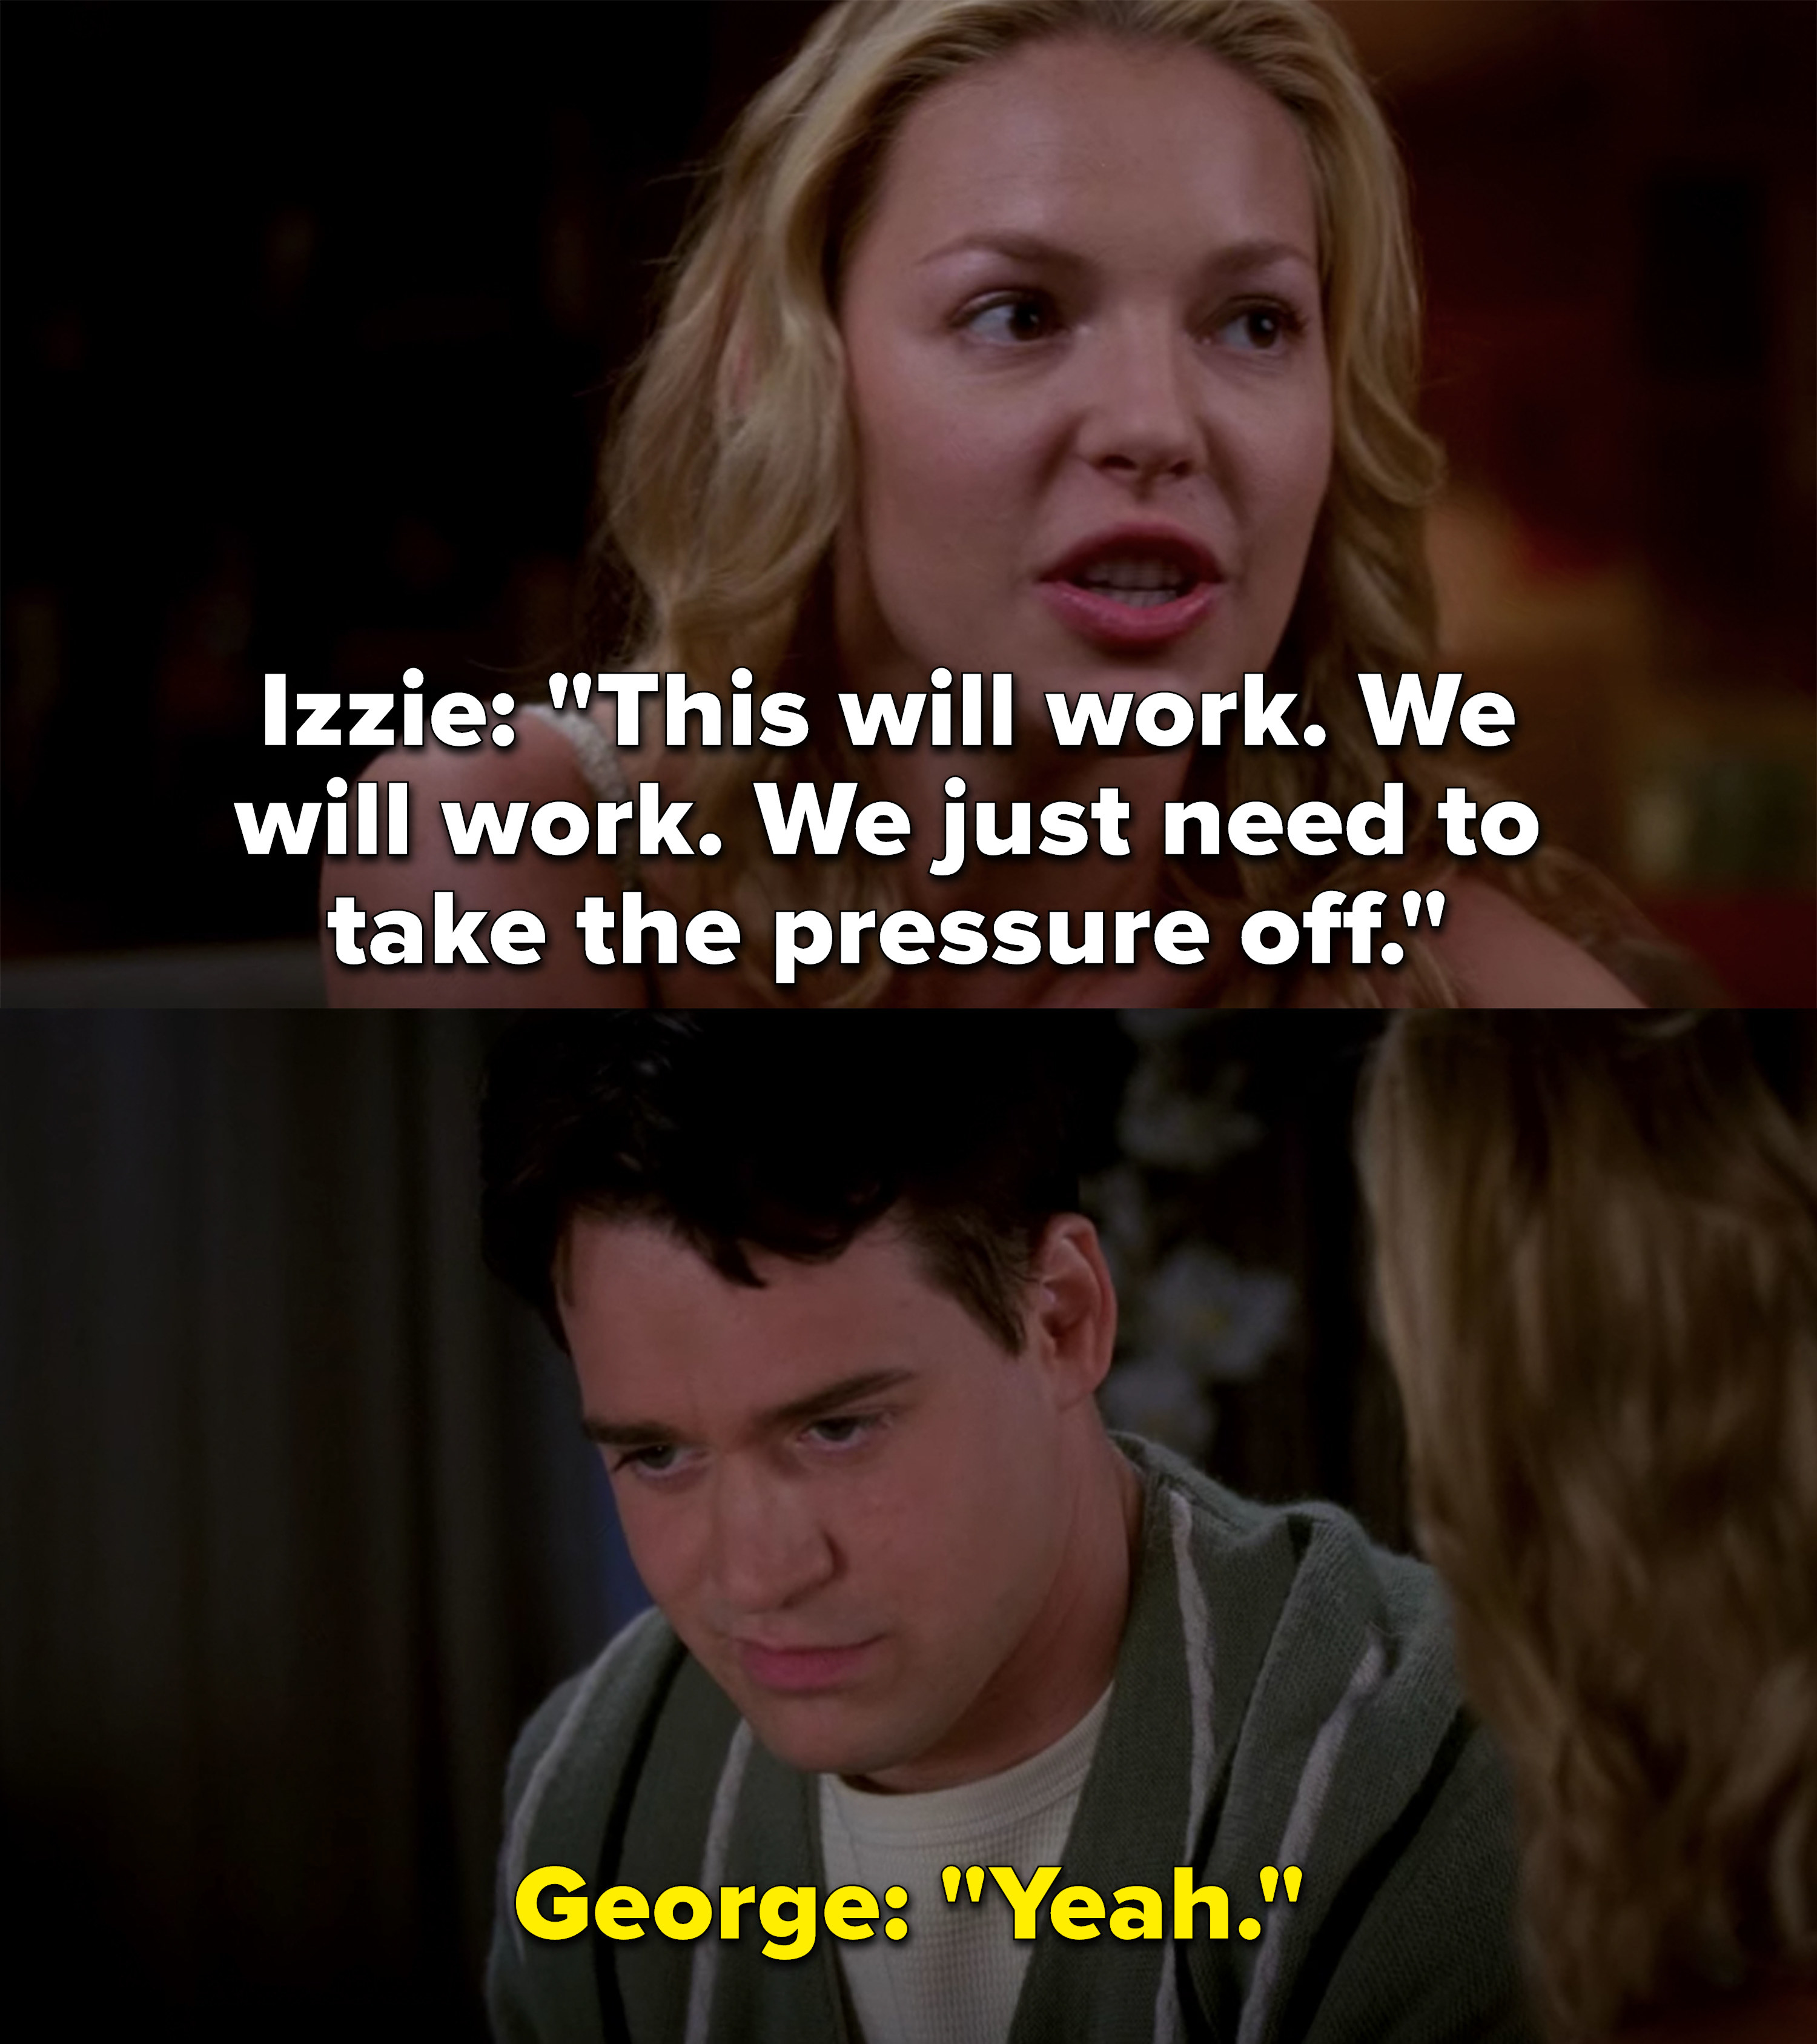 Izzie says their relationship will work, they just need to take the pressure off